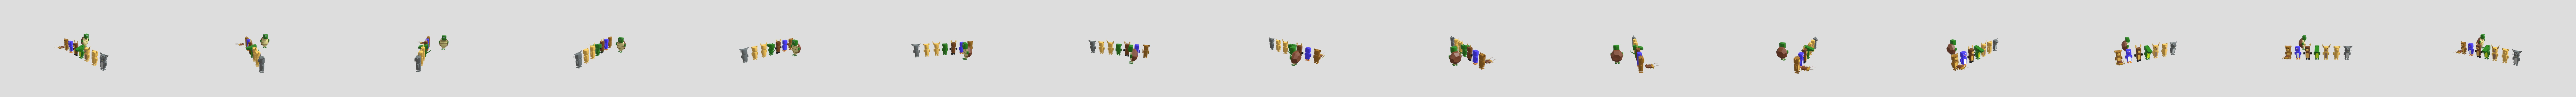 super bear adventure characters - Download Free 3D model by